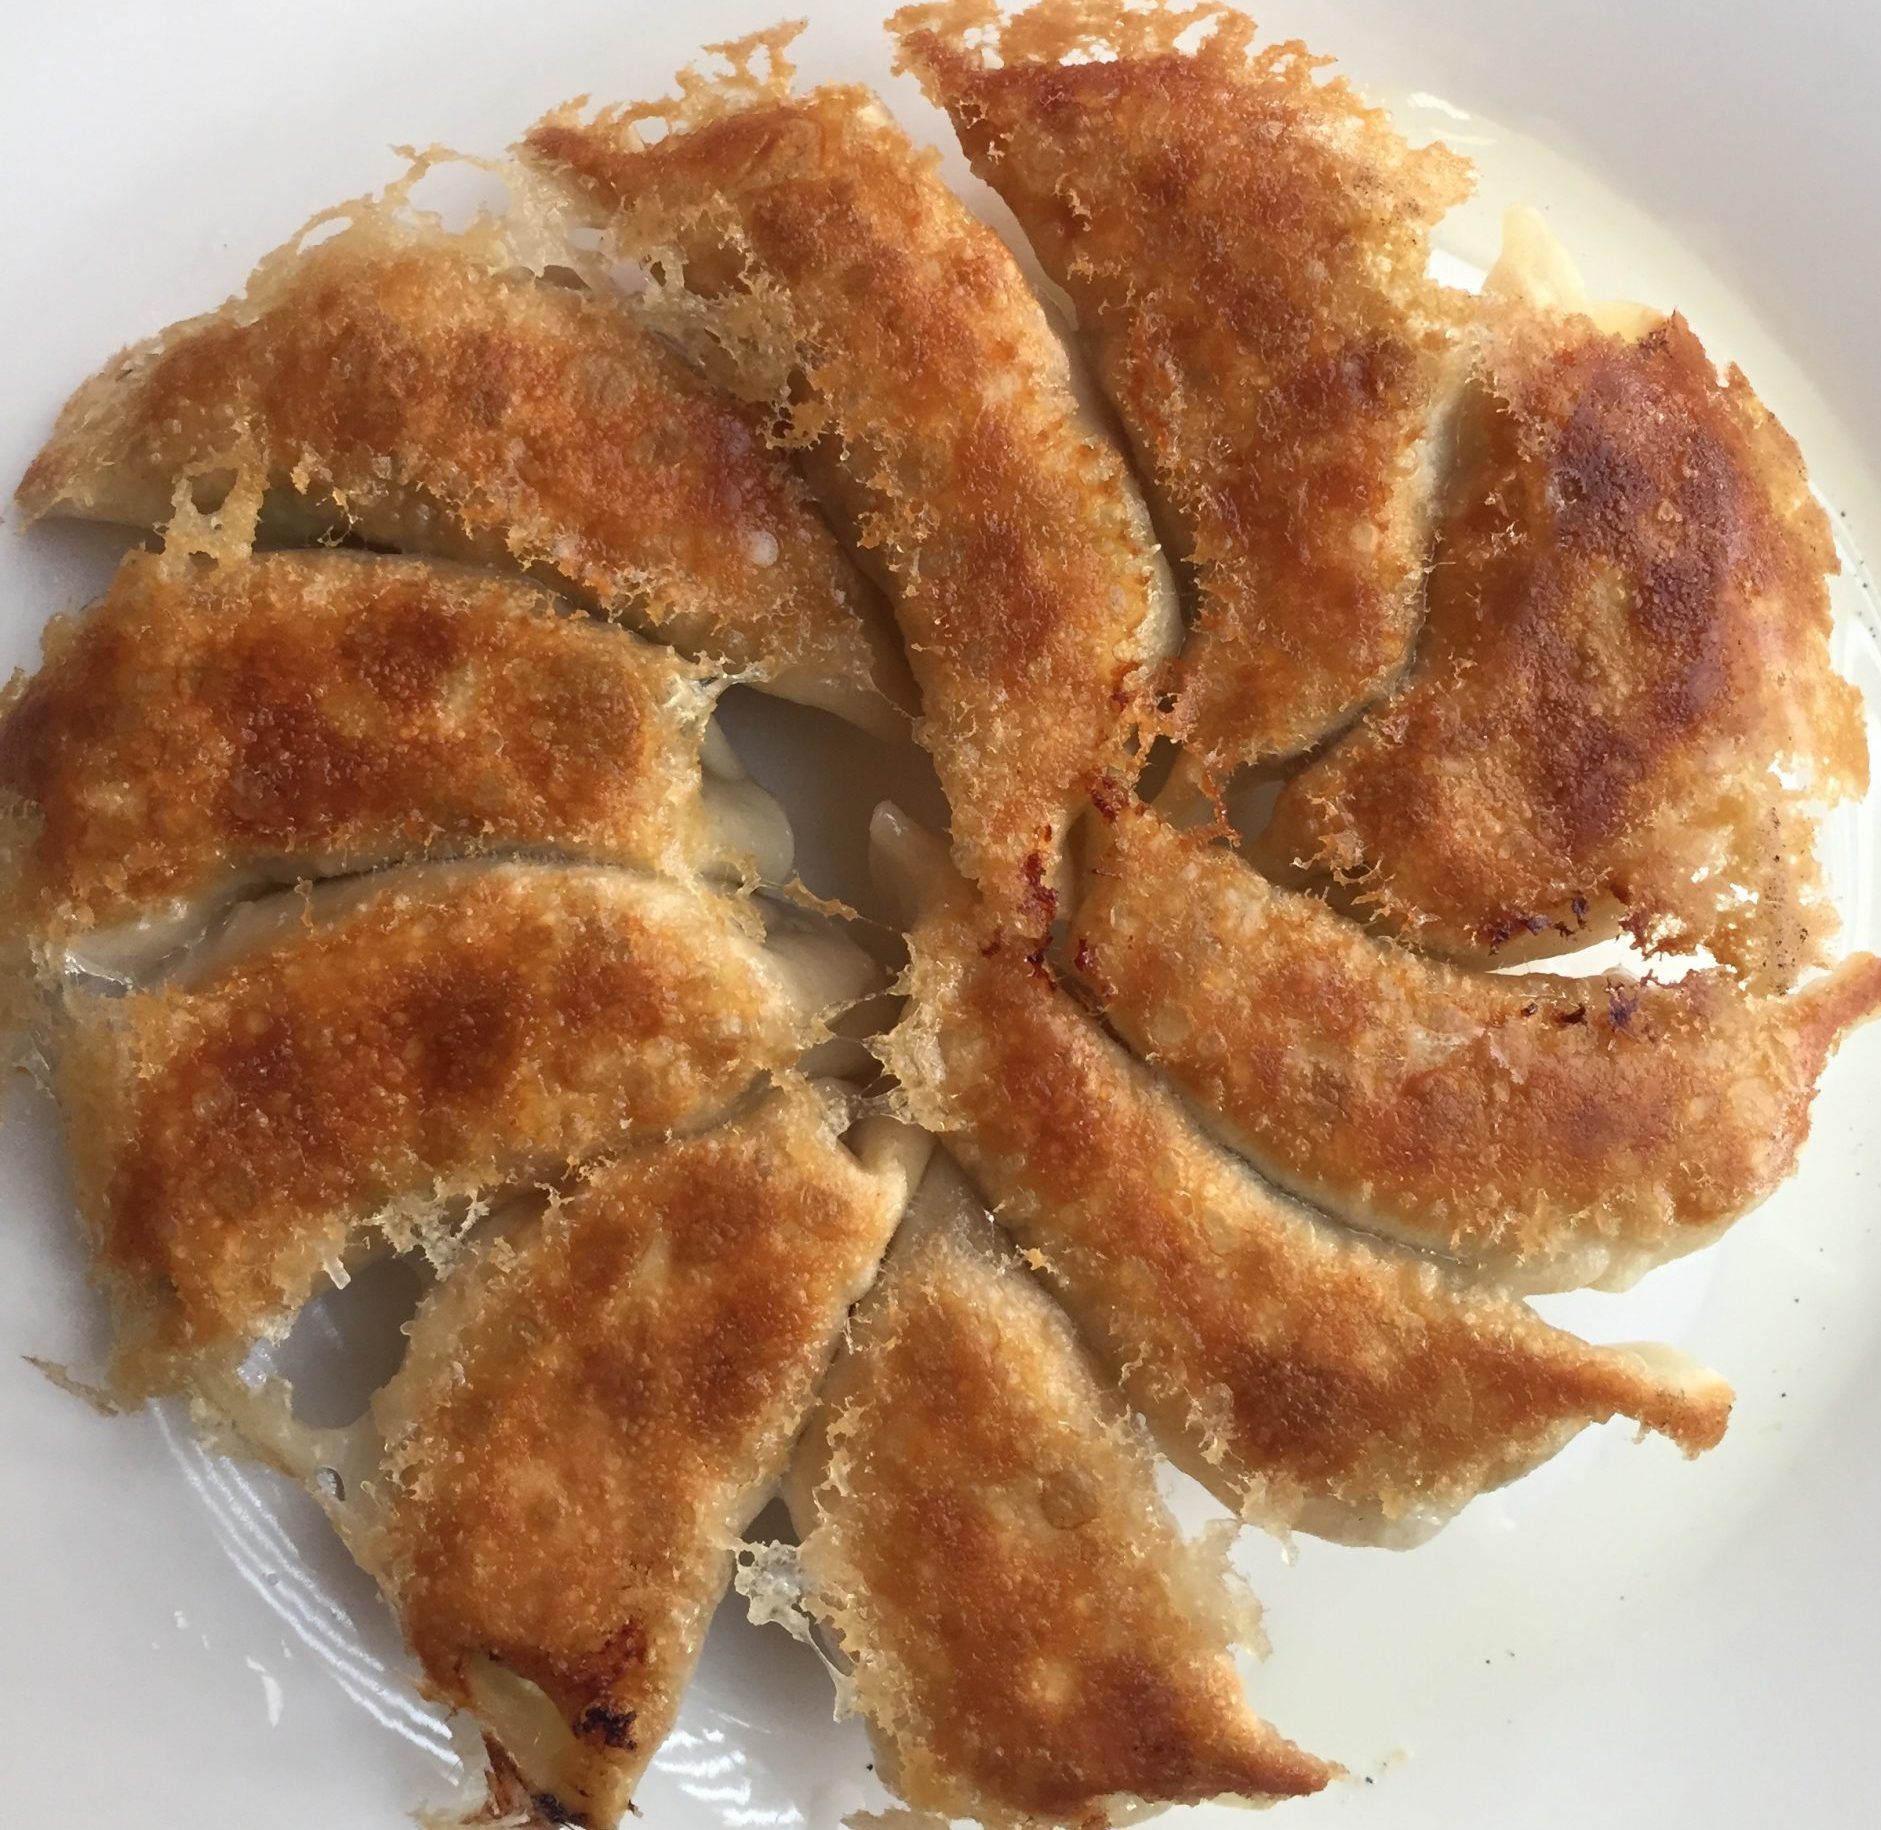 Potstickers with a crispy, lacy base and juicy filling